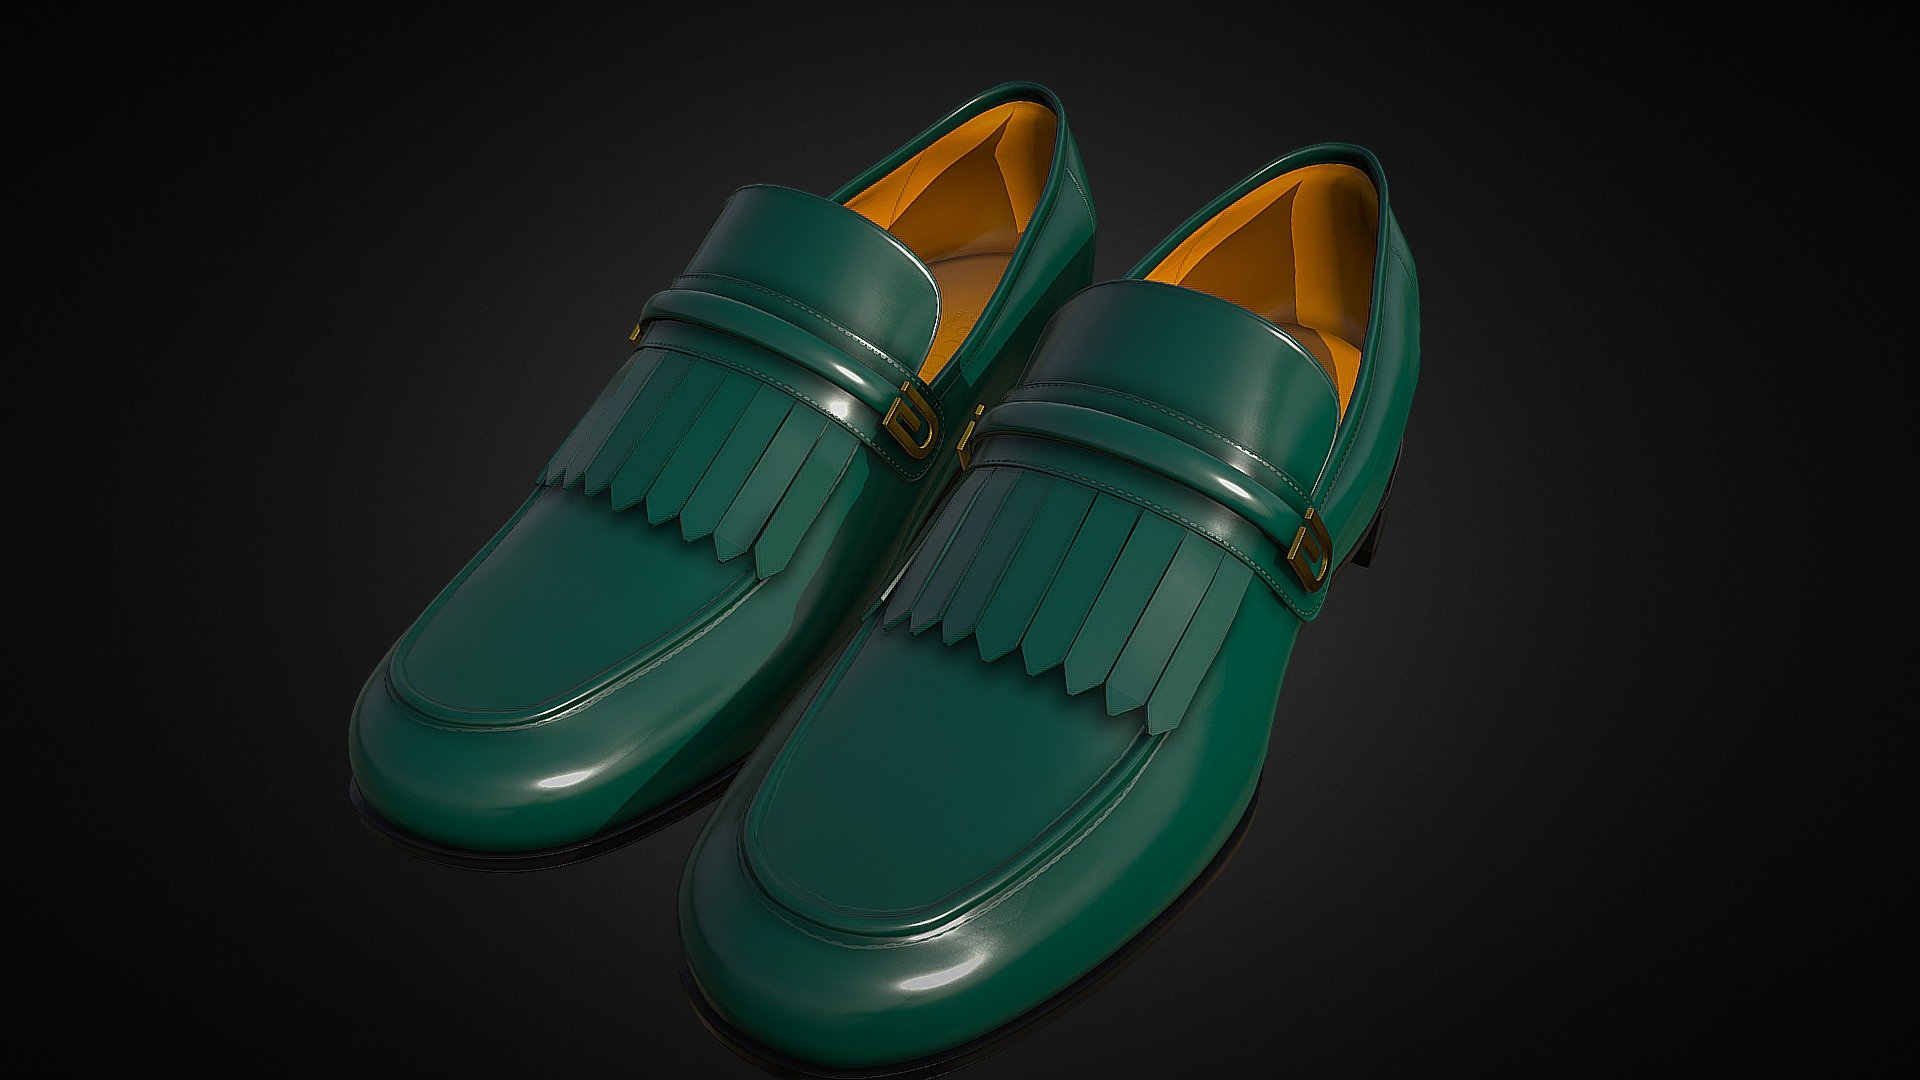 Modelled and Textures at Ares Immersive Studio

Made for AR/VR and Game Ready

You can contact at- hari.aresvisual@aresstudio.in for any project related query - Gucci Men Loafer Shoes - 3D model by Hari K Nair ( Ares Immersive) (@ares_immersive) 3d model